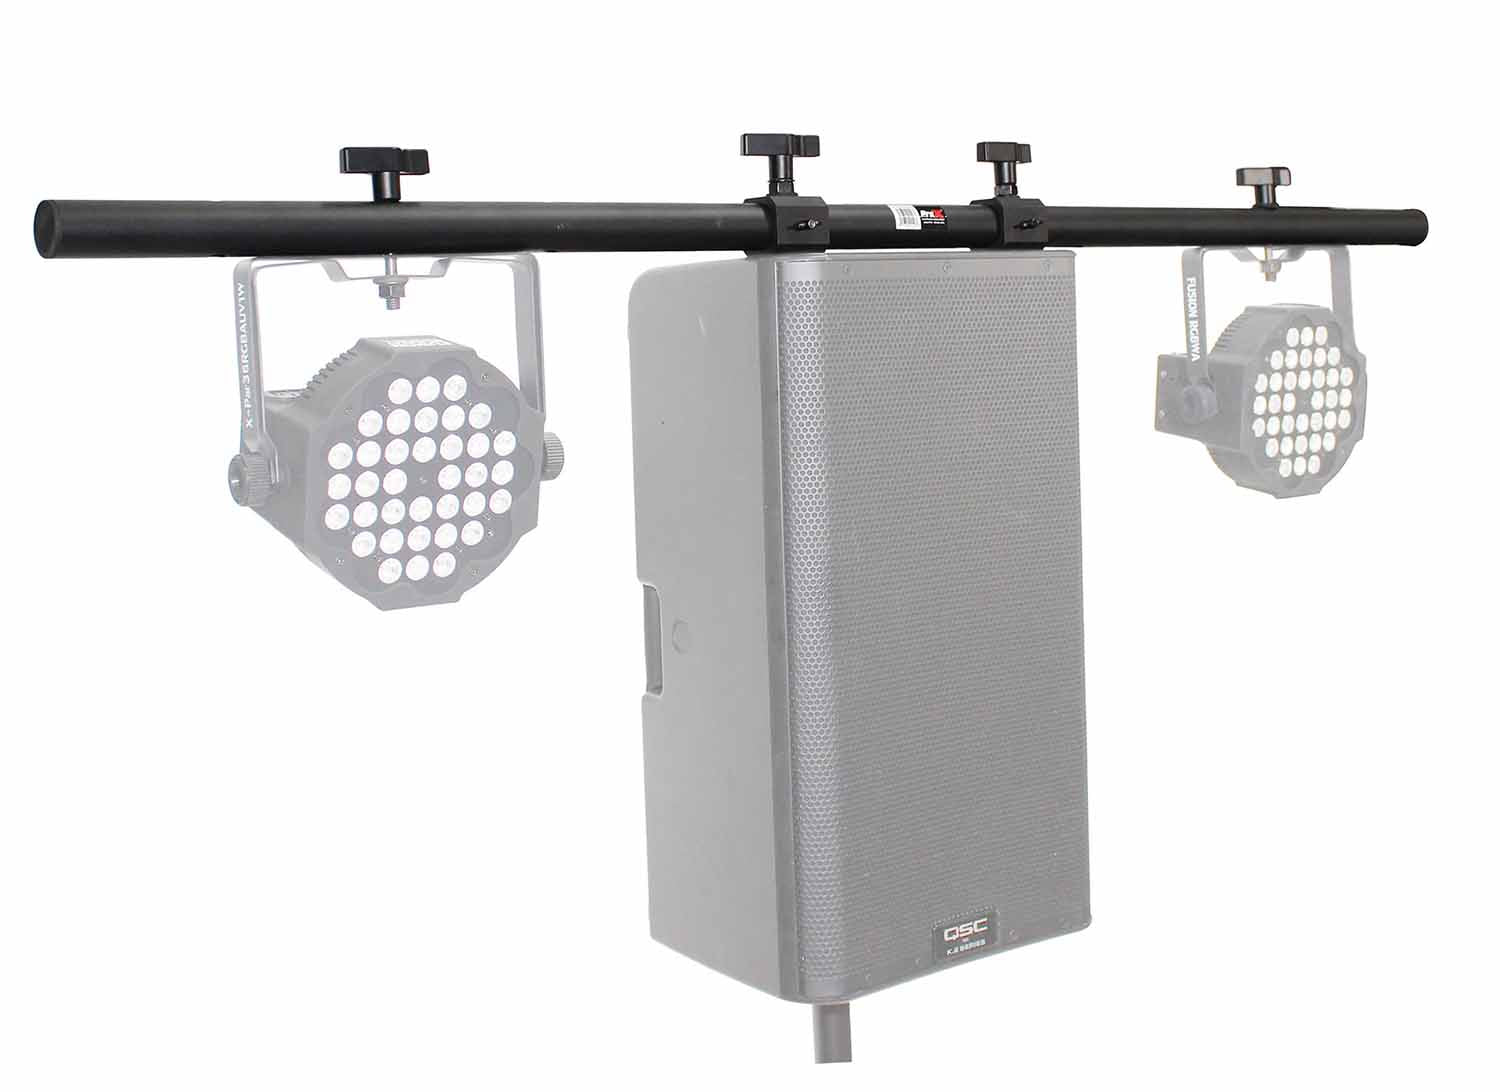 ProX X-SPLSTBAR-5FT Universal Light Bar Mounting System for Point Source PA Speakers with Fly-points - 5 Feet - Hollywood DJ